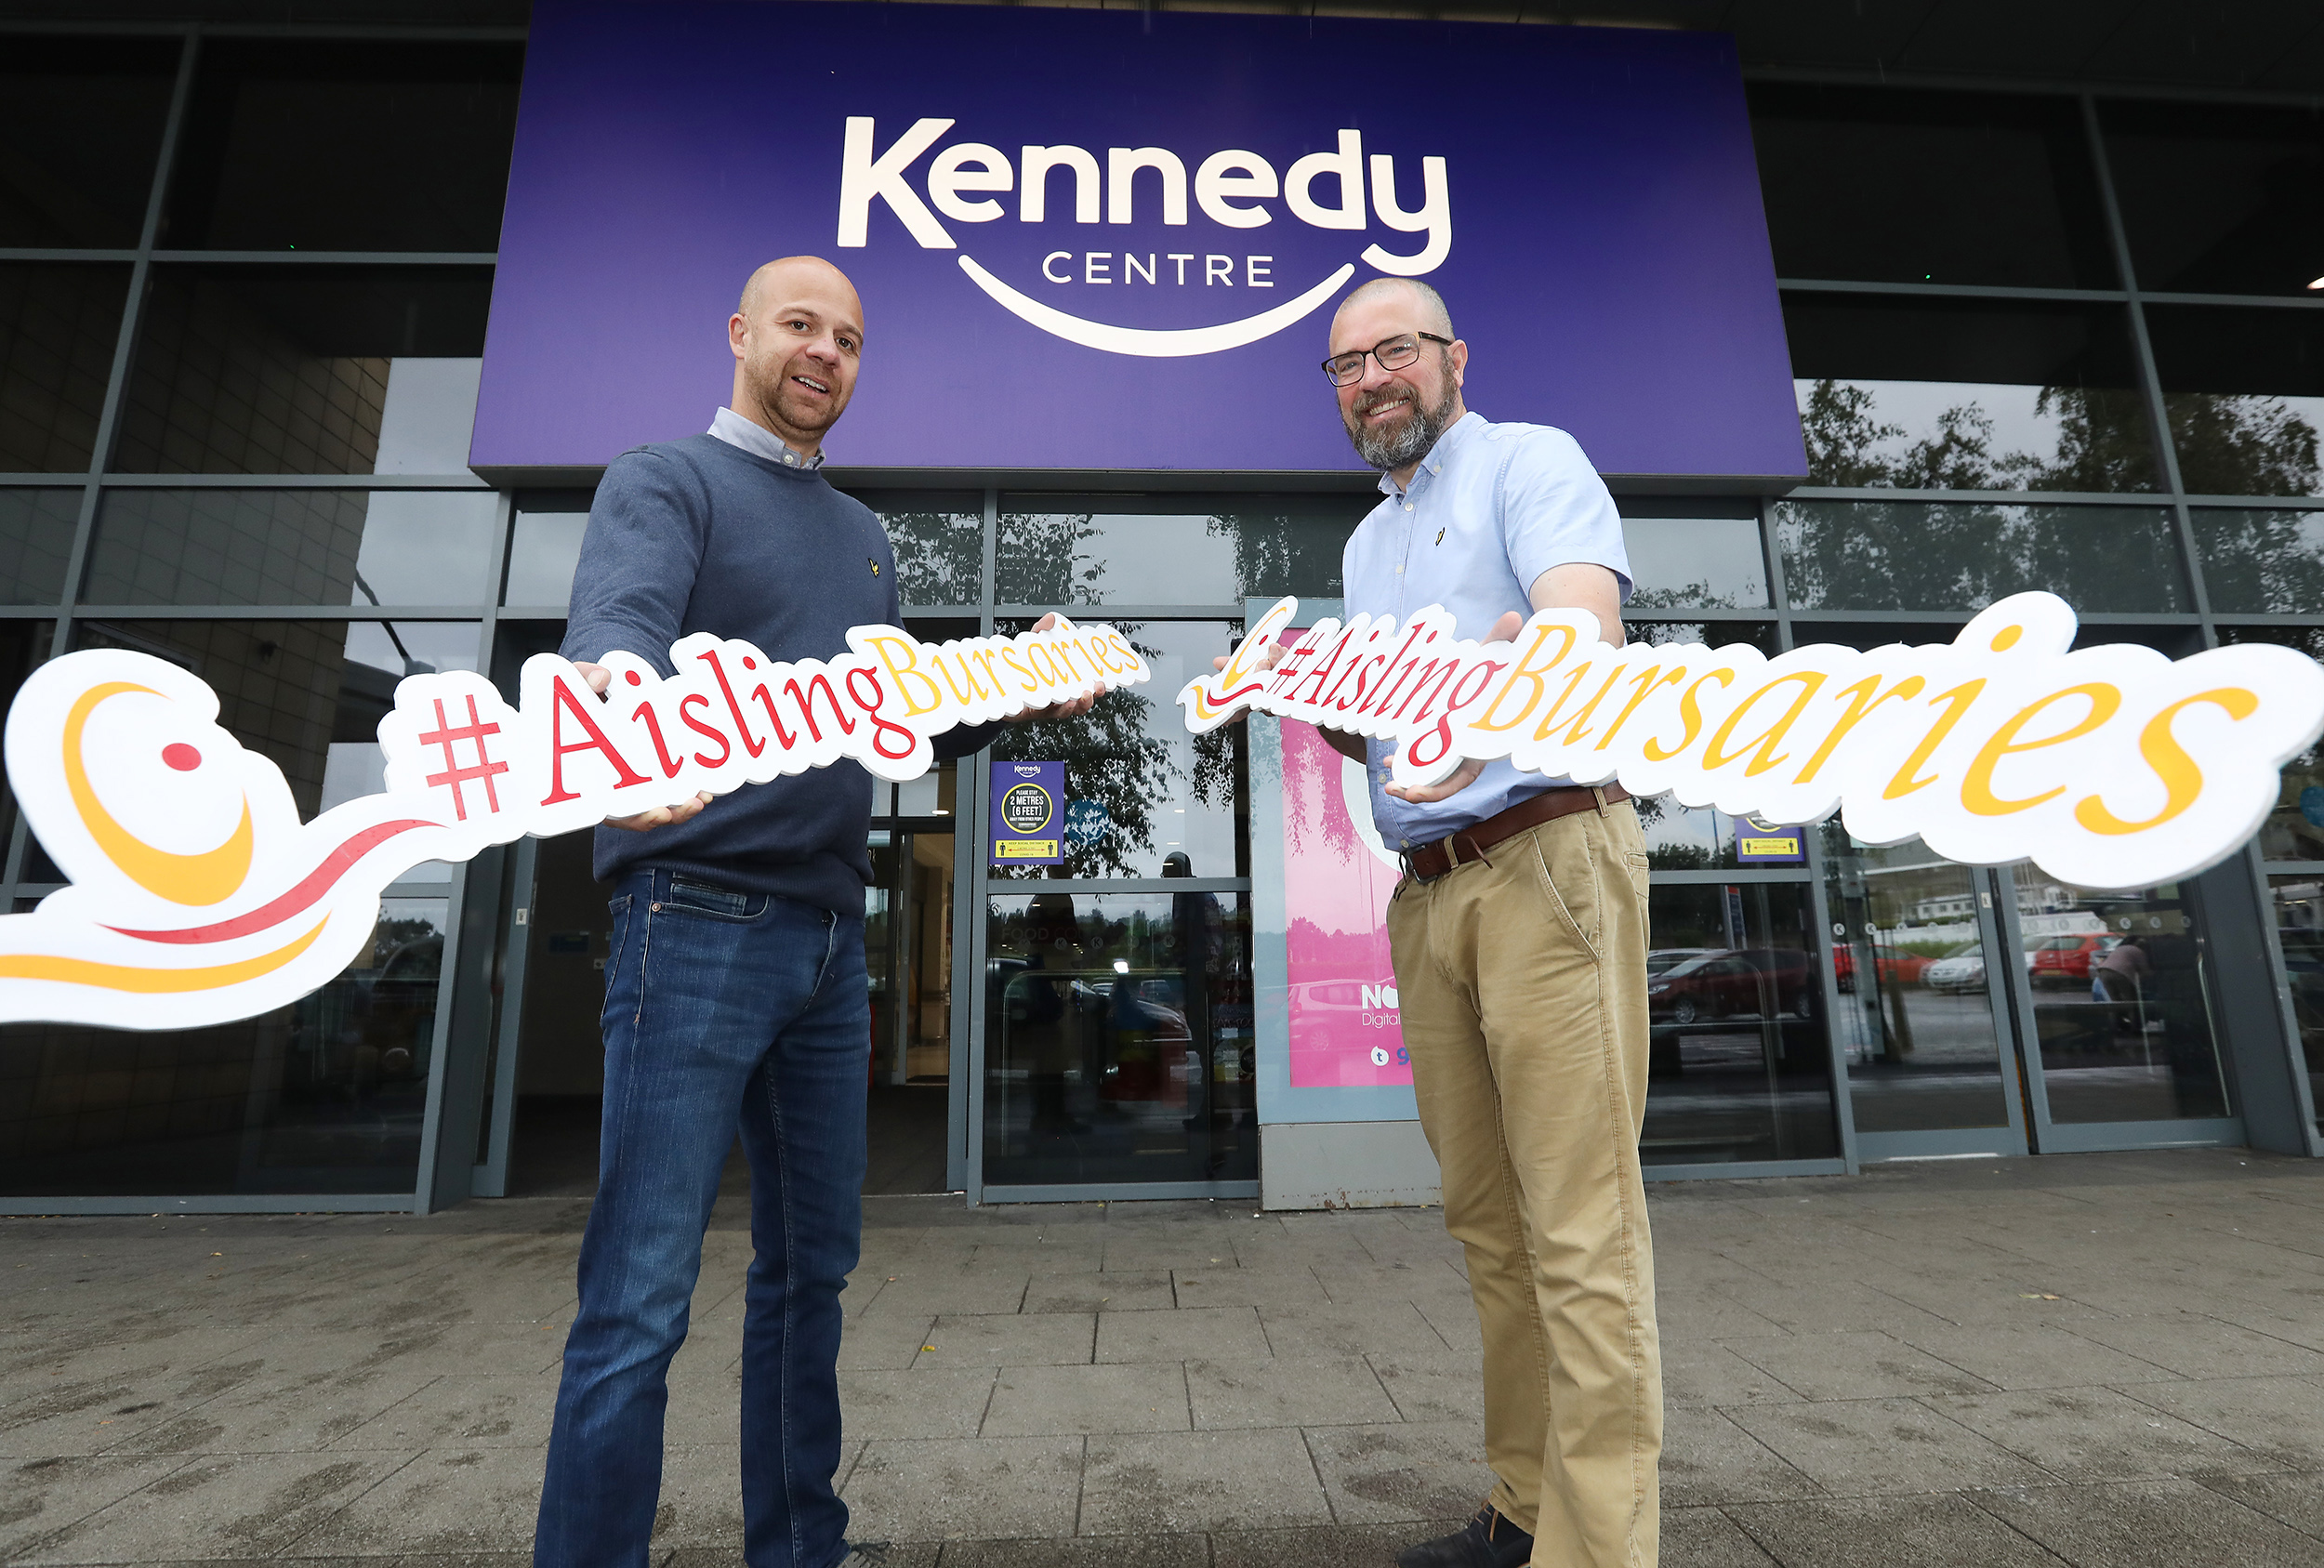 STEPPING UP: John Jone of the Kennedy Centre pledges support for Aisling Bursaries to Hugh Duffy of the West Belfast Partnership Board.